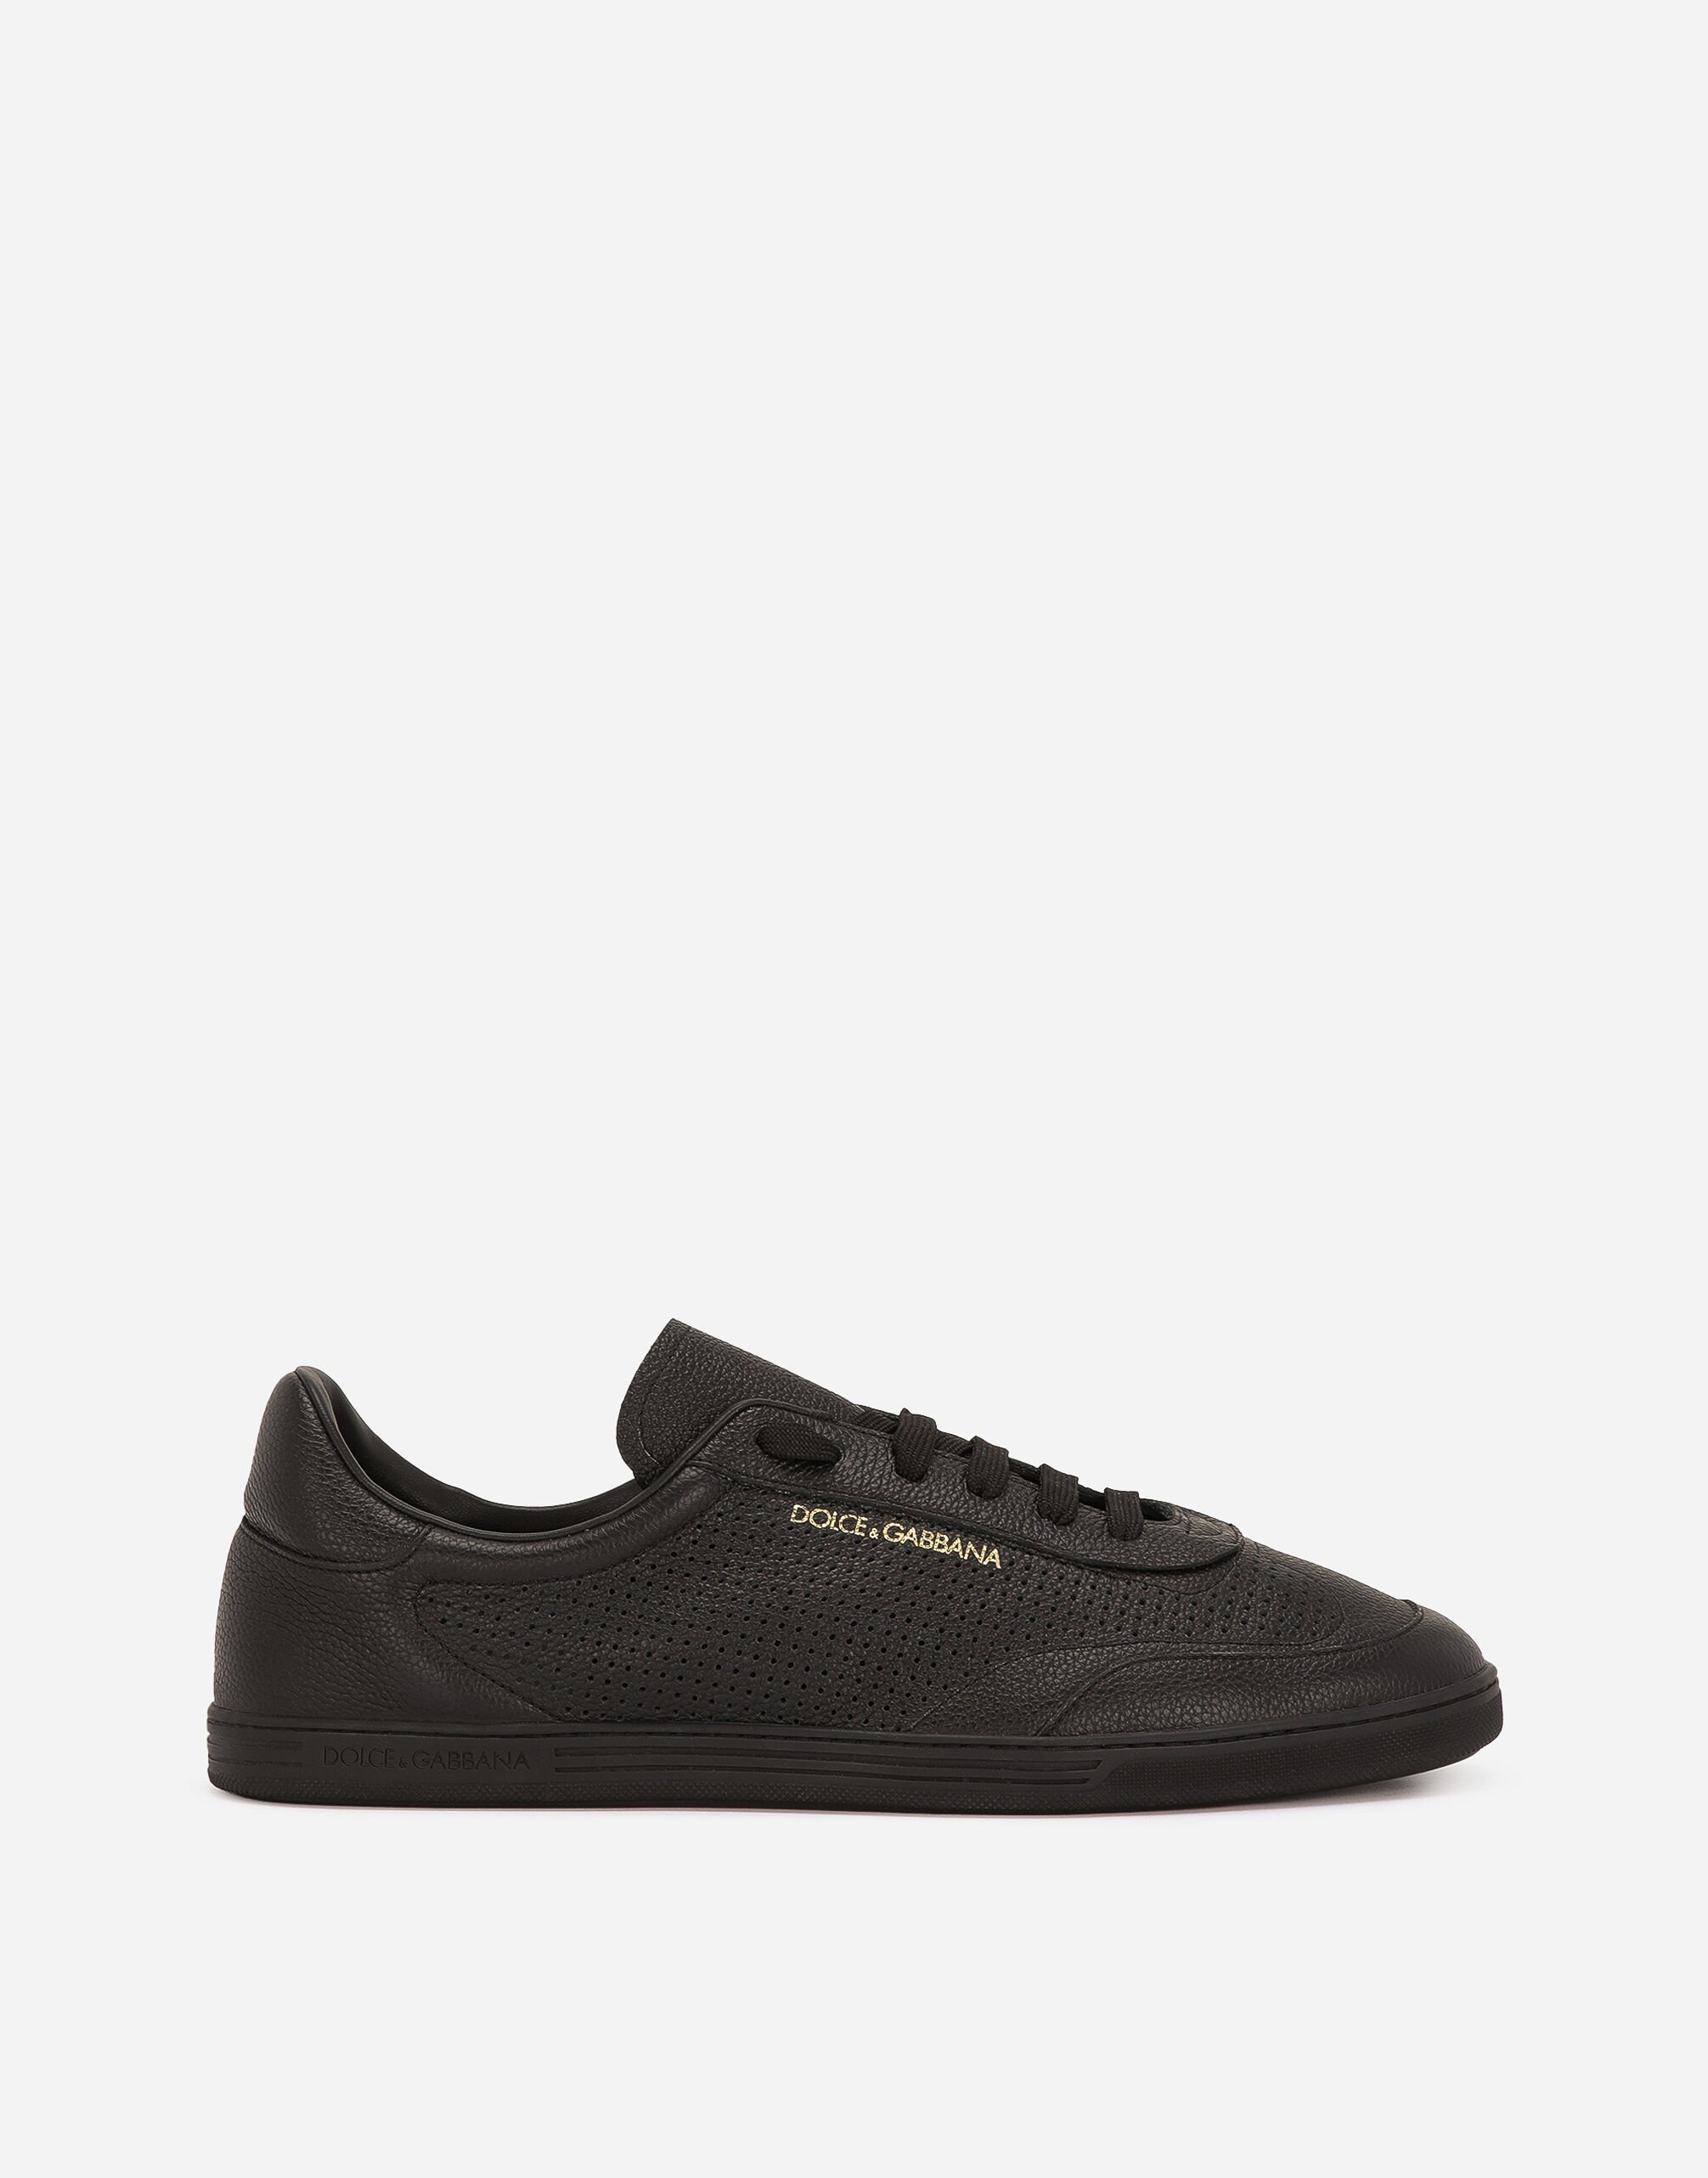 ${brand} Perforated calfskin Saint Tropez sneakers ${colorDescription} ${masterID}